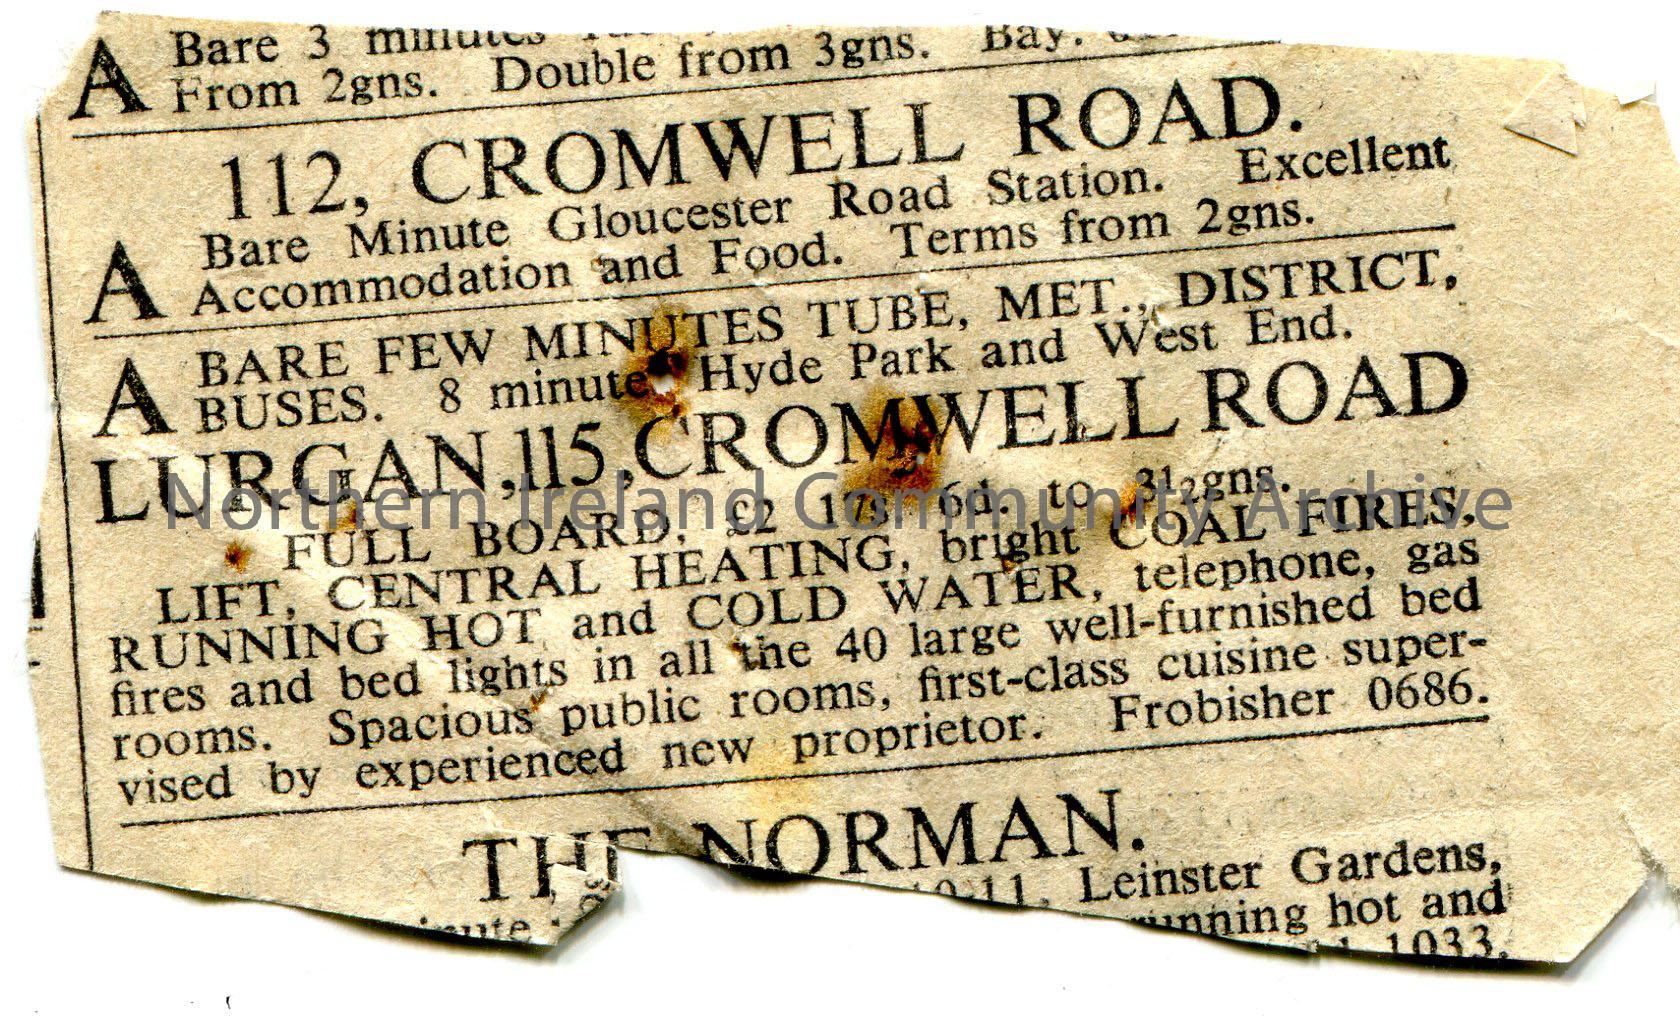 Advertisement cut out of newspaper for accommodation in London at 112 Cromwell Road, Lurgan and 115 Cromwell Road.